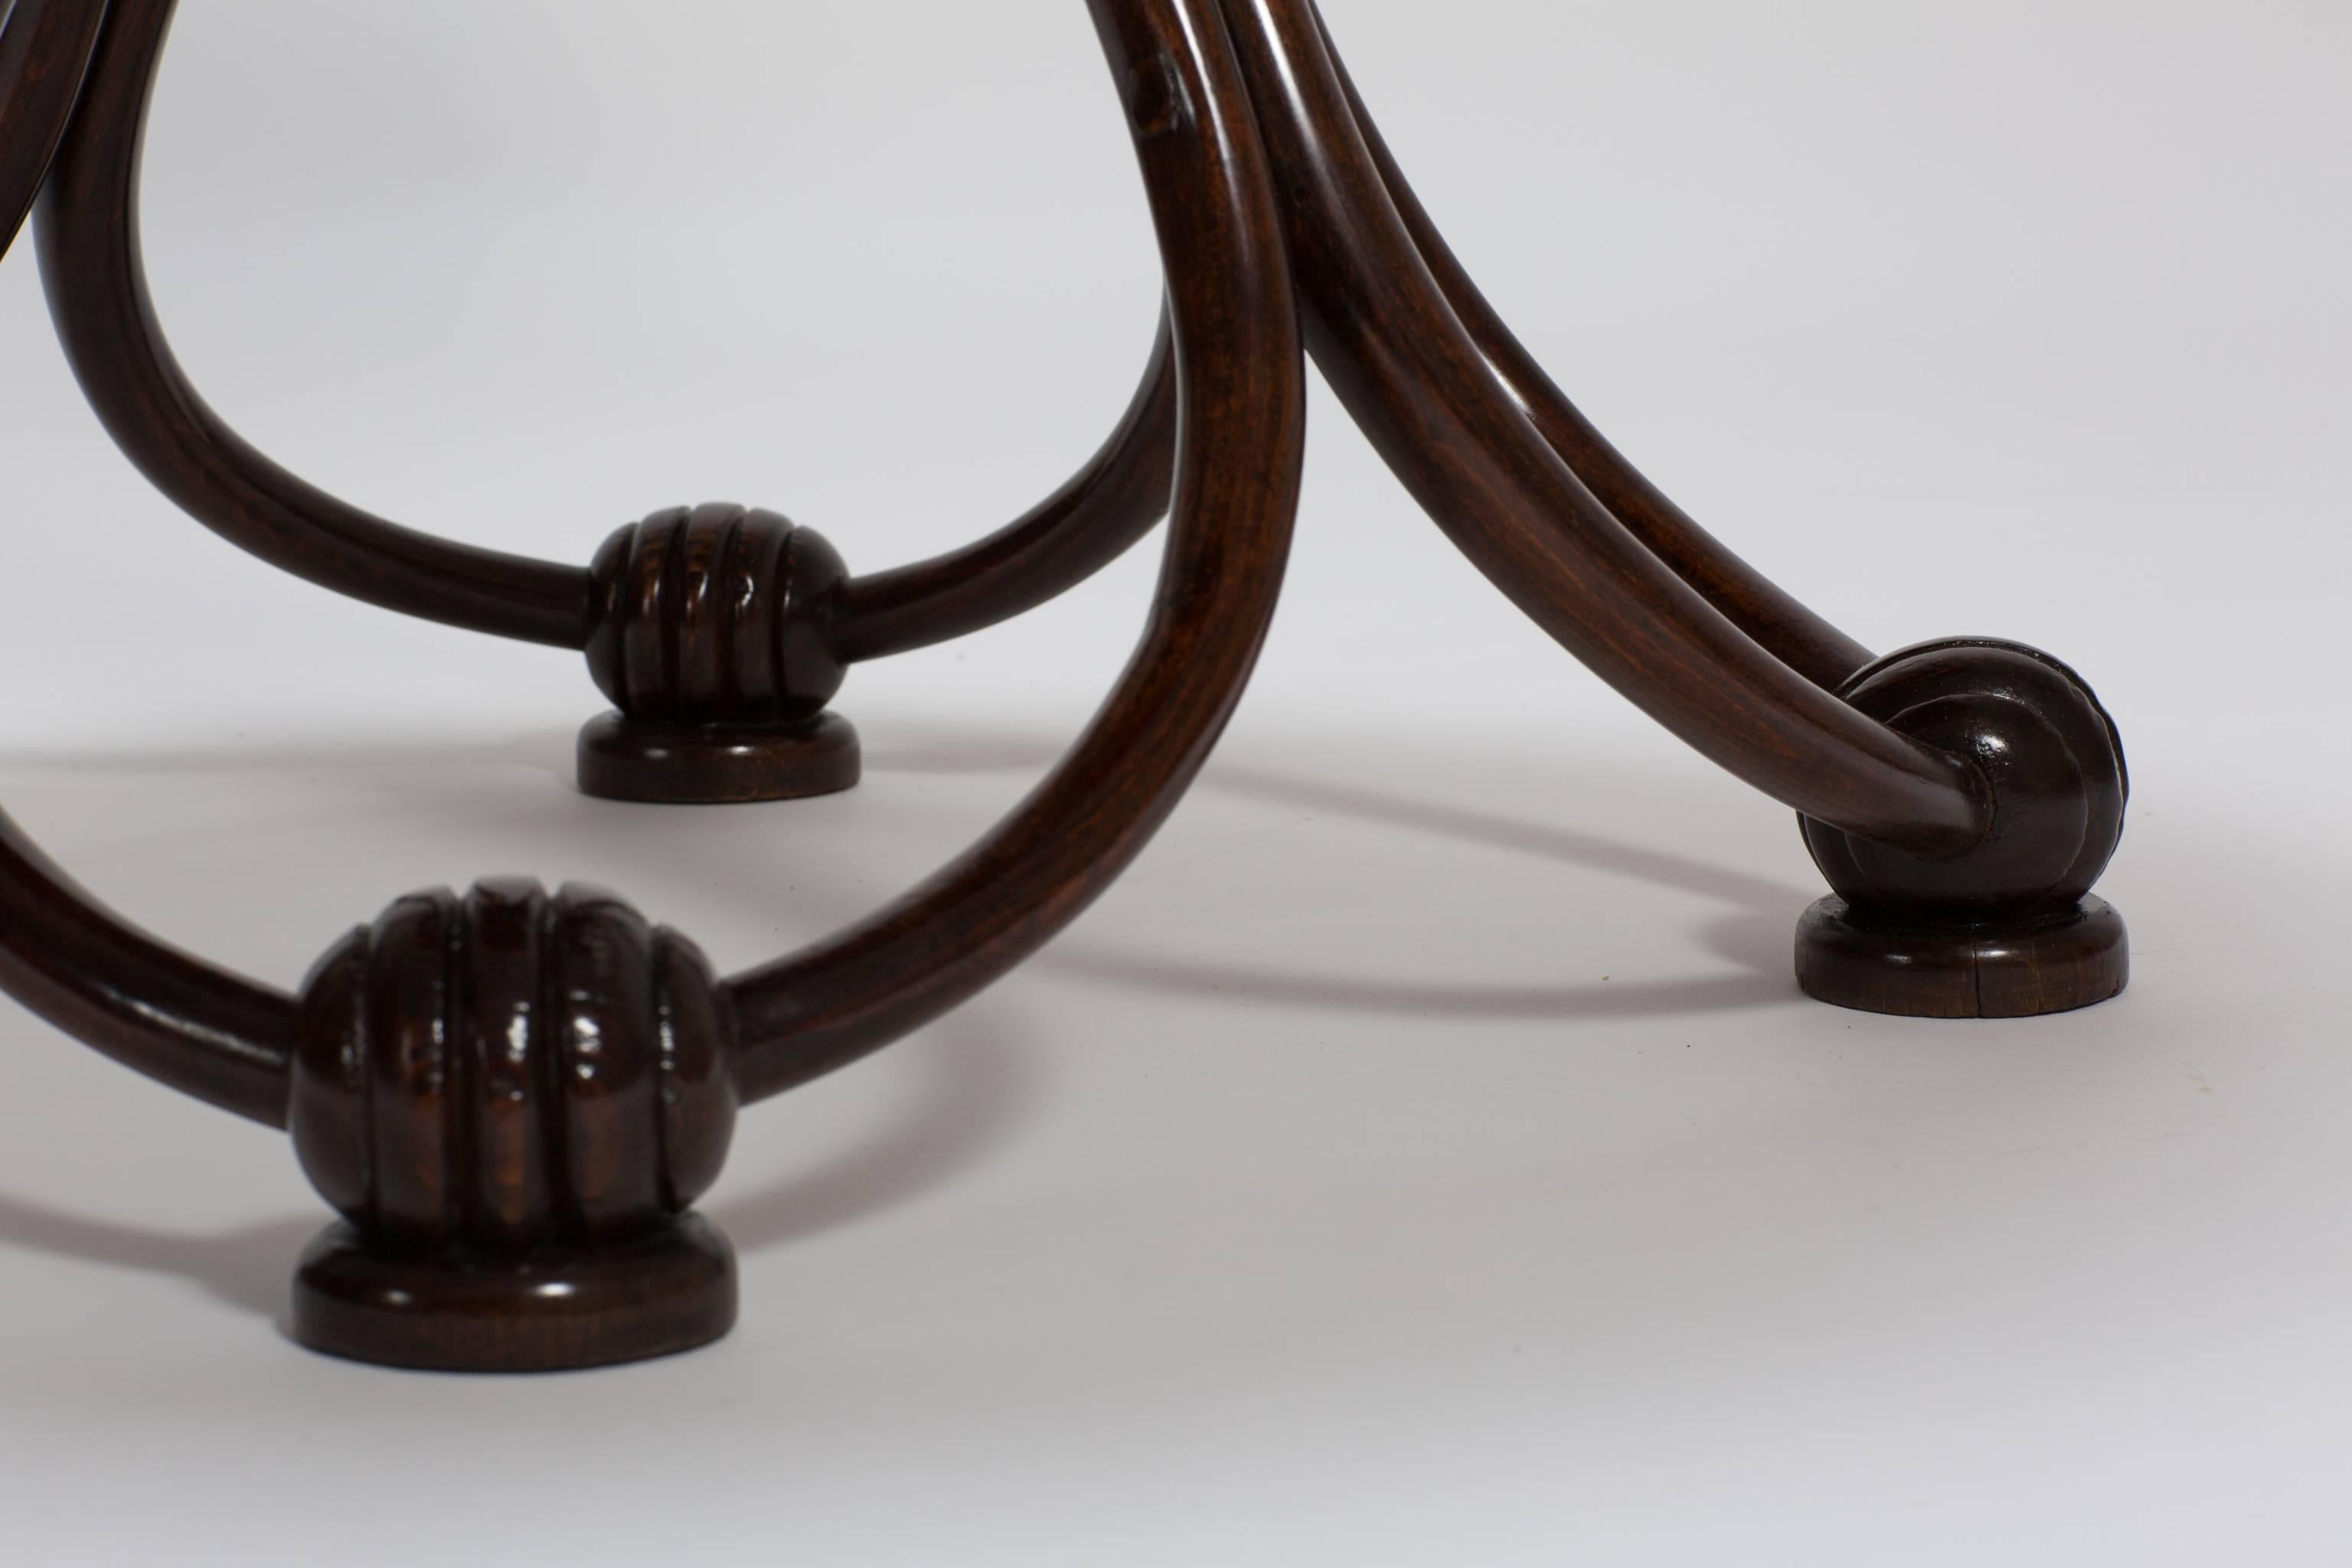 Austrian Antique Art Nouveau Bentwood Coffee Table from the Late 19th Century by Thonet For Sale